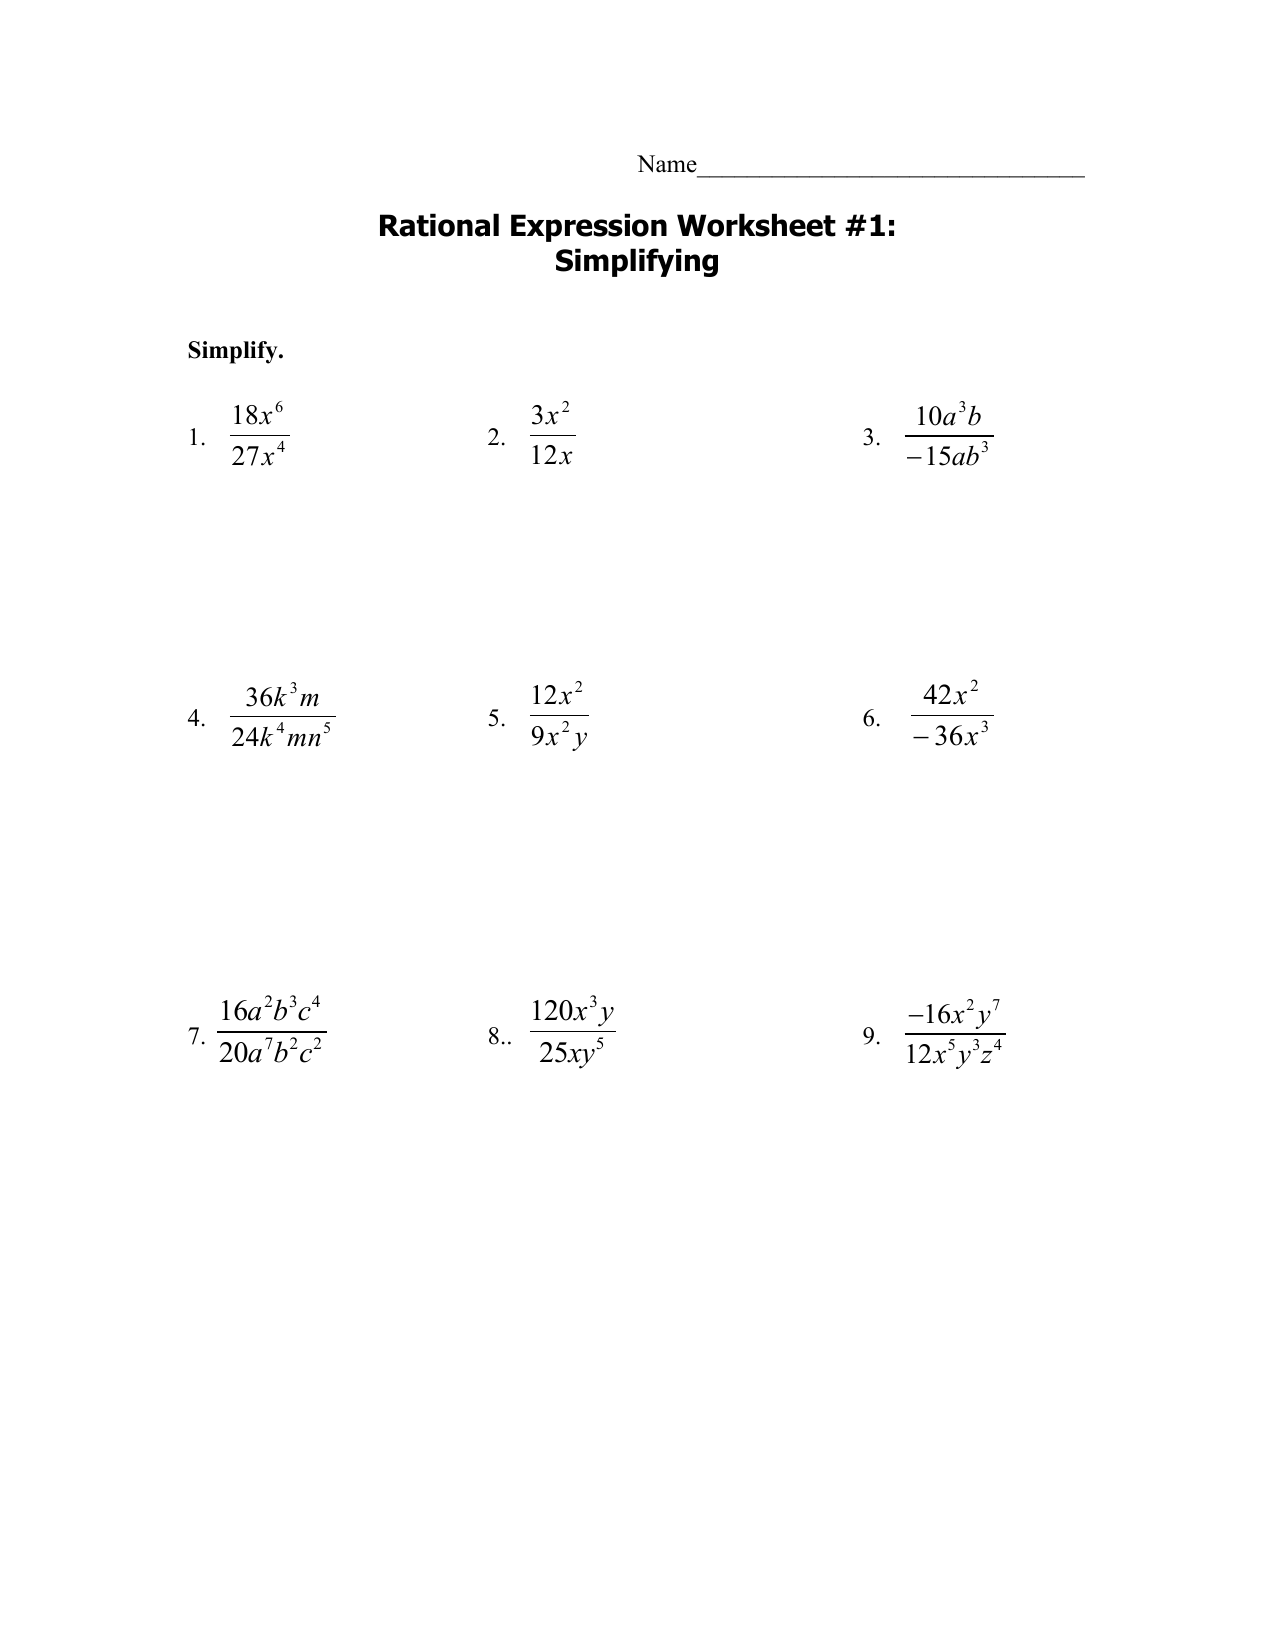 M22 rationalworksheets22-225 22 Throughout Multiplying Rational Expressions Worksheet